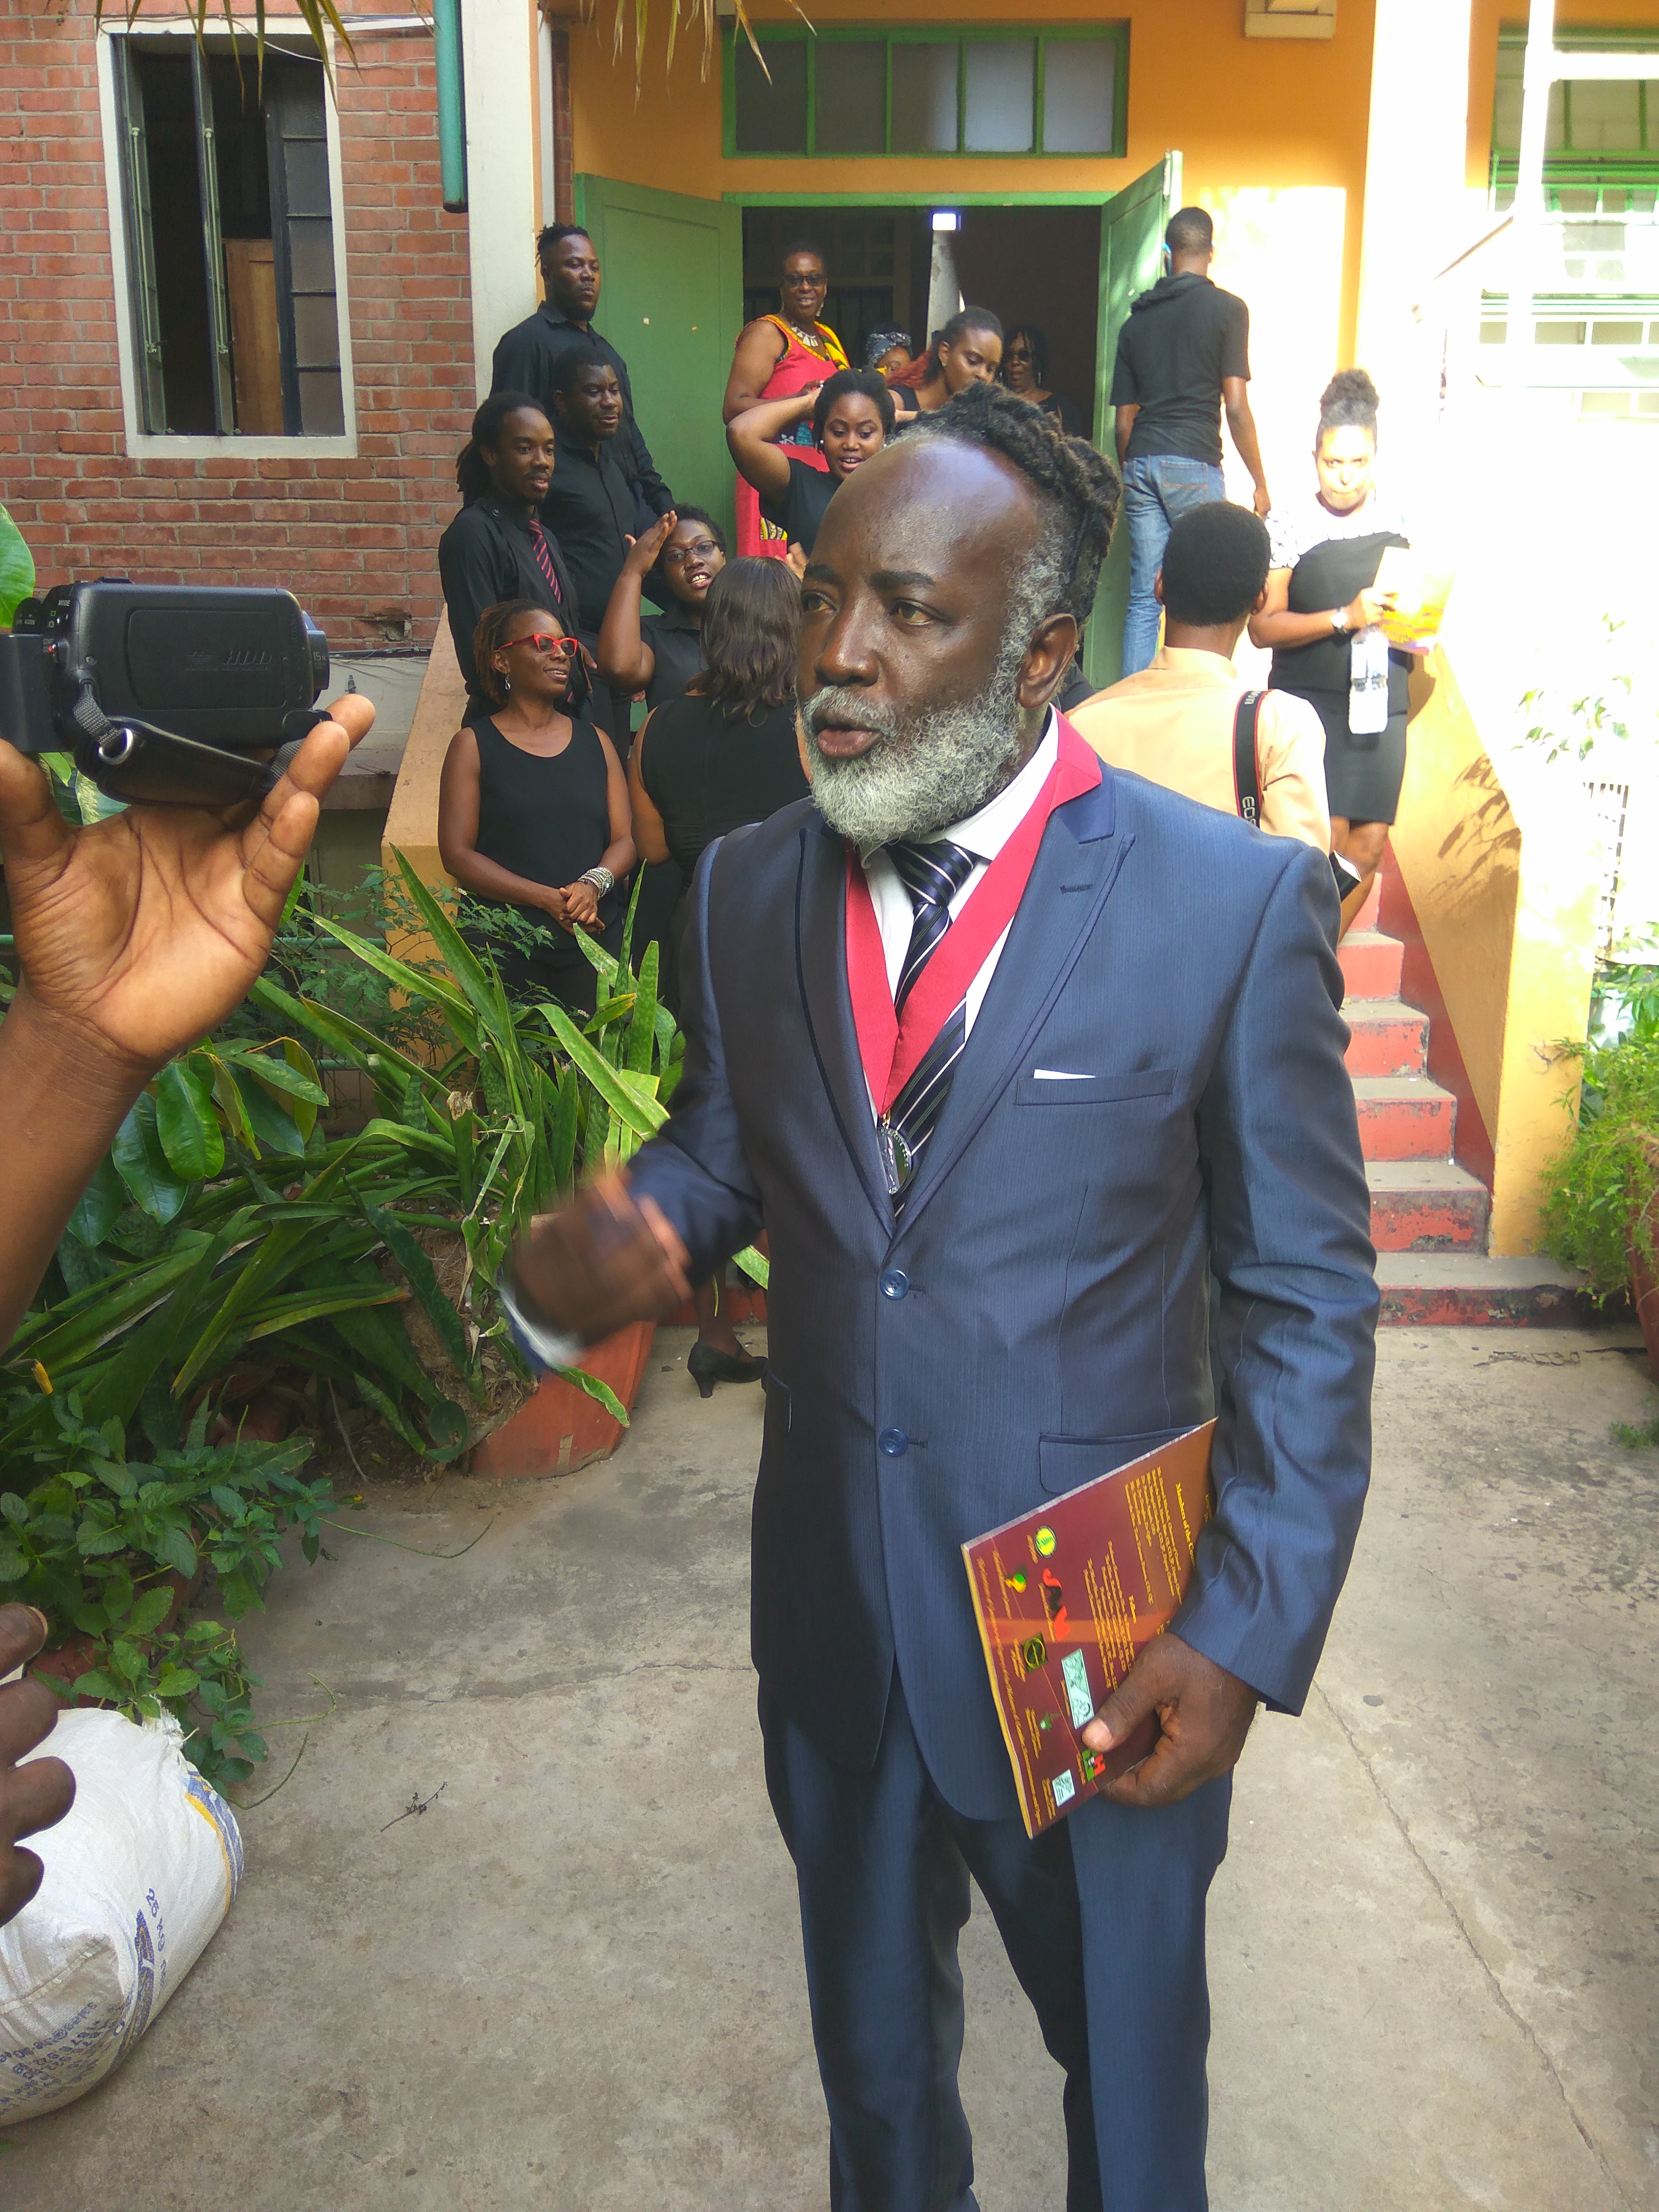 ANTHEA McGIBBON PHOTOS: Musgrave Medals Awards Ceremony held at the Lecture Hall, Institute of Jamaica on May 25th, 2017. Freddie McGregor in an interview.